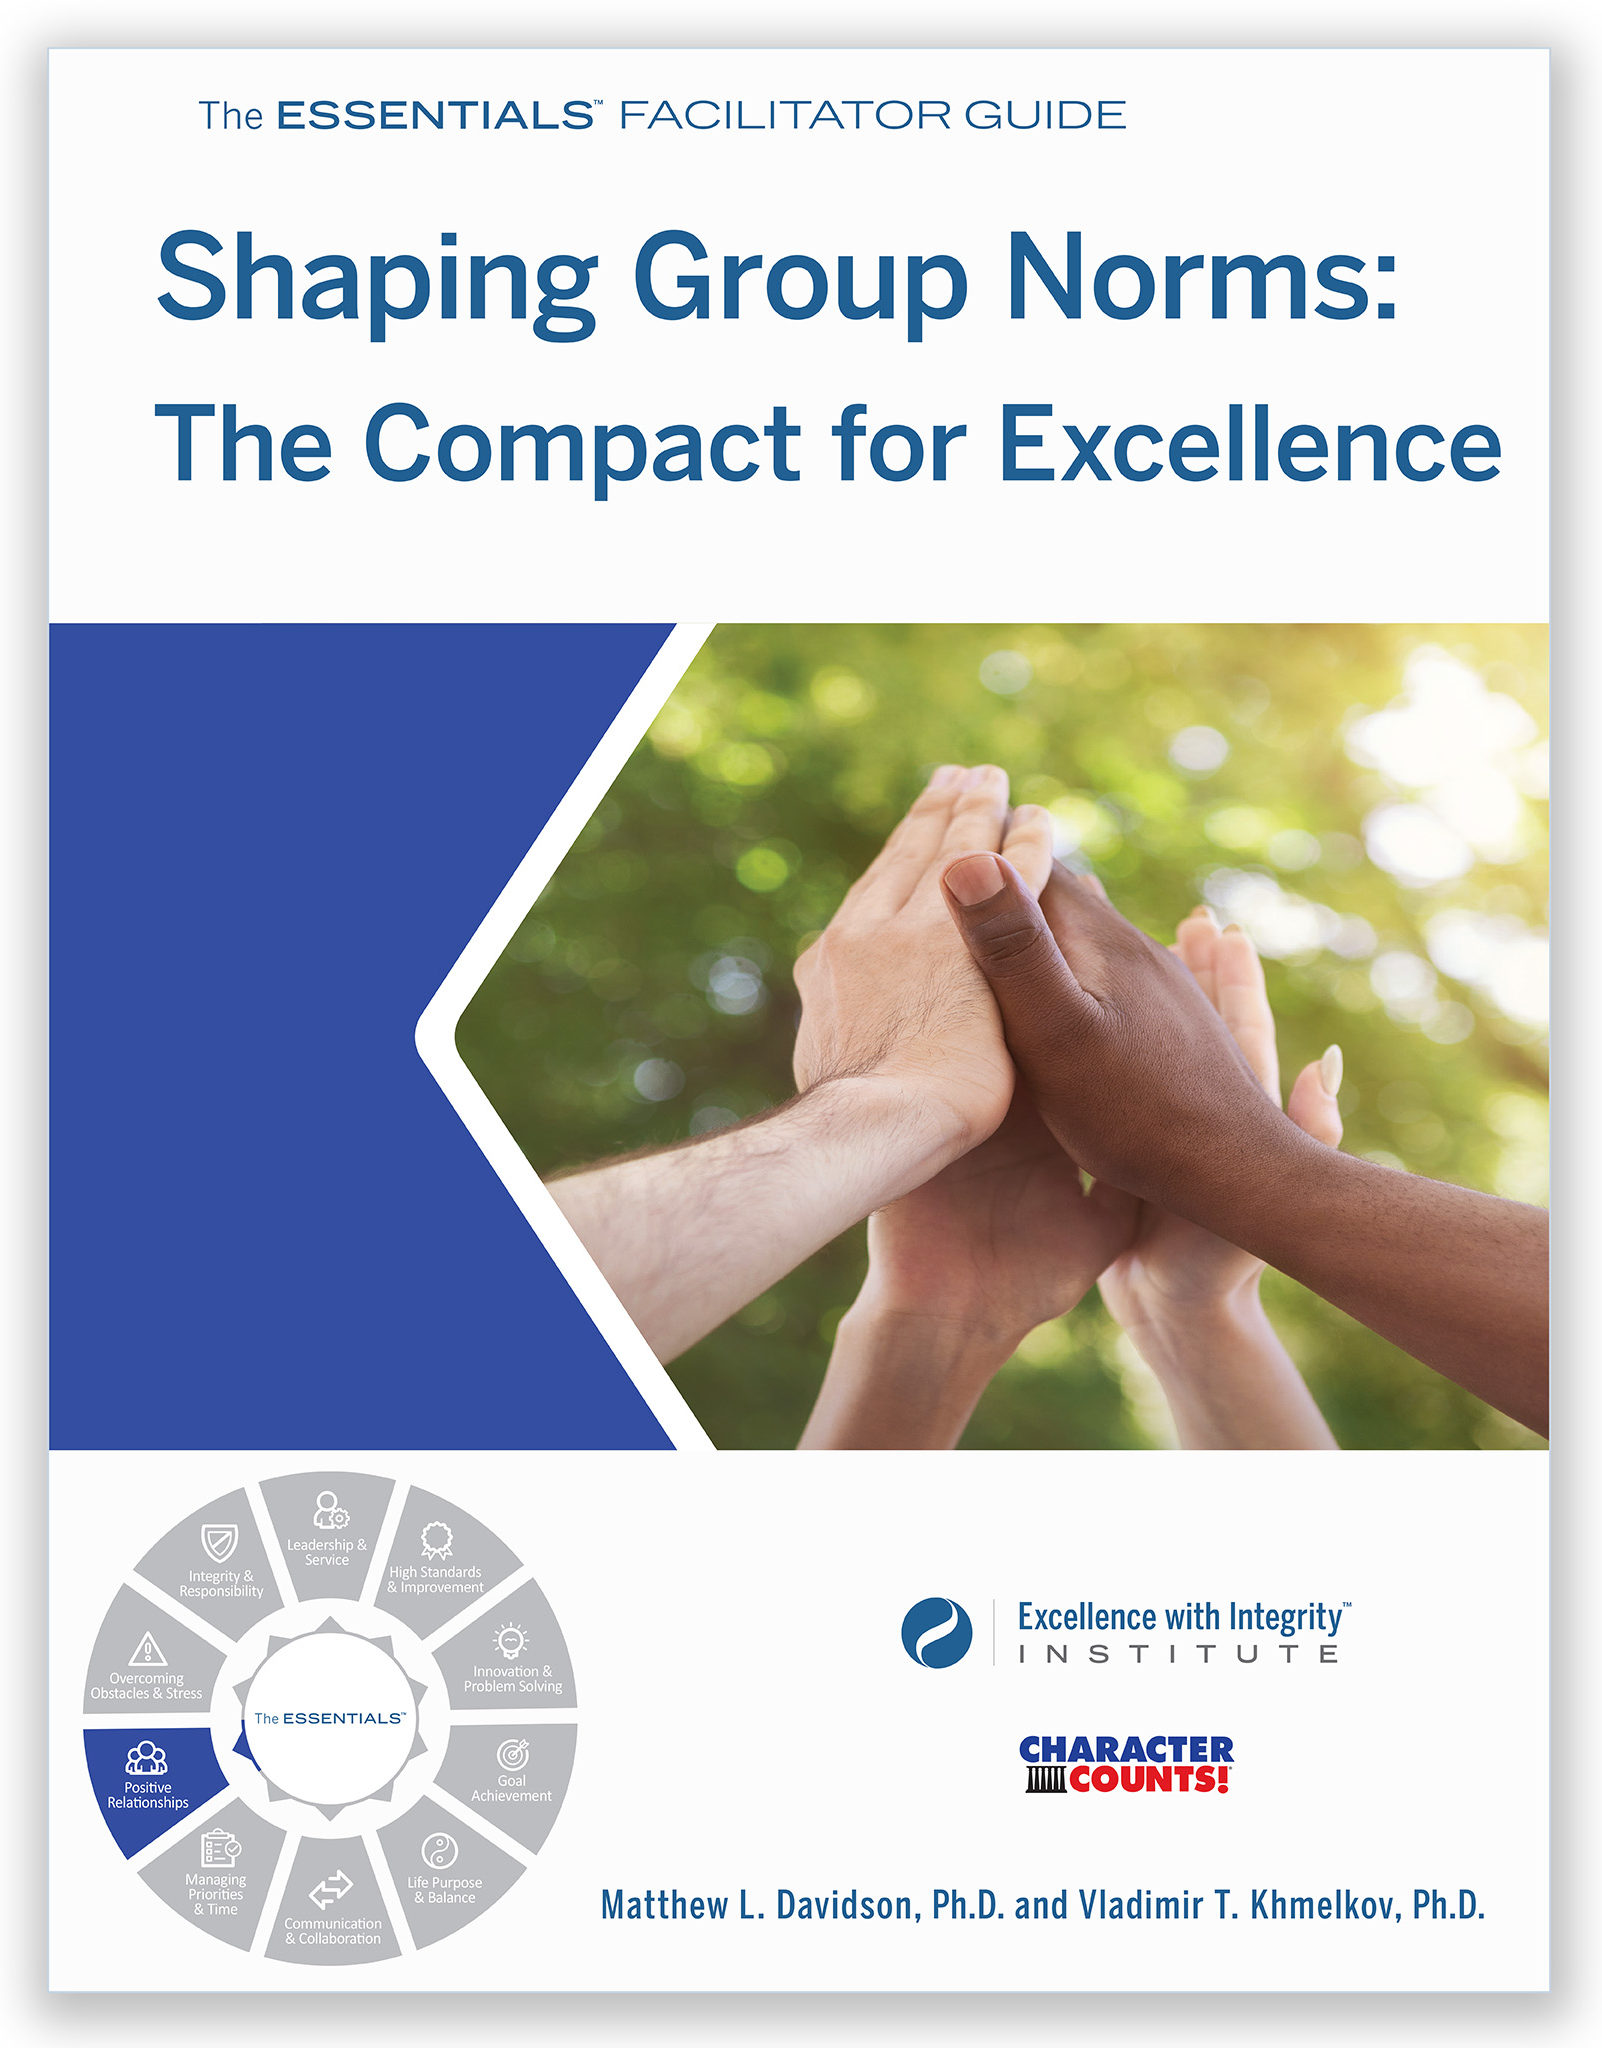 Shaping Group Norms